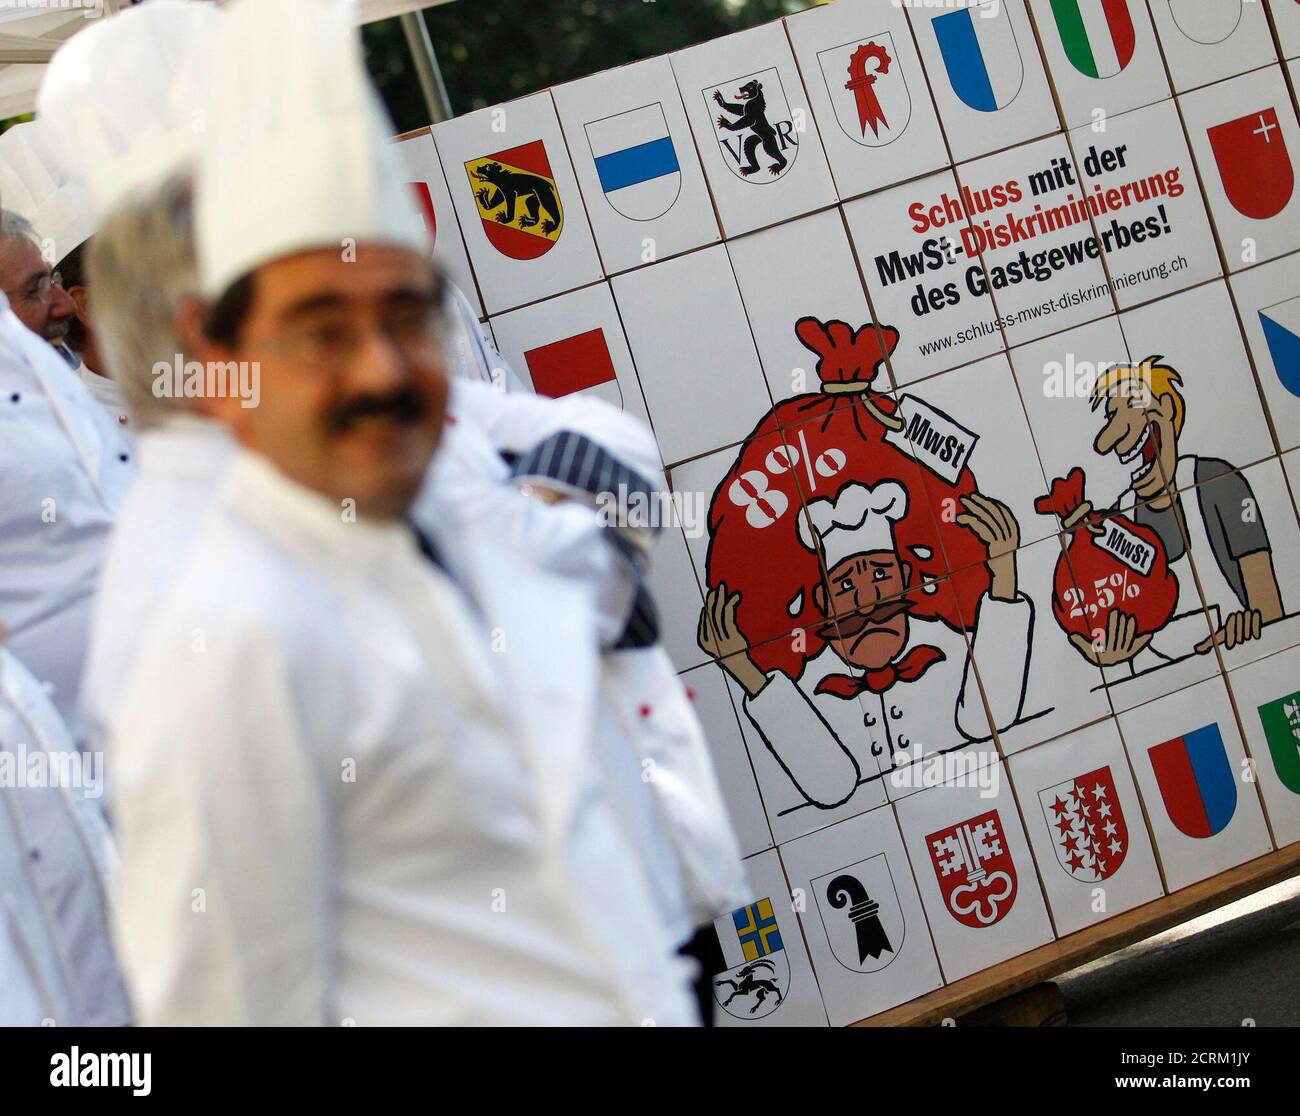 Members of Gastro Suisse pose next to boxes with some 119,290 signatures of the popular initiative against discrimination on the value added tax in gastronomy (Schluss mit der MwSt-Diskriminierung des Gastgewerbes!), outside the parliament building in Bern September 21, 2011. REUTERS/Pascal Lauener (SWITZERLAND - Tags: CIVIL UNREST POLITICS FOOD BUSINESS) Stock Photo